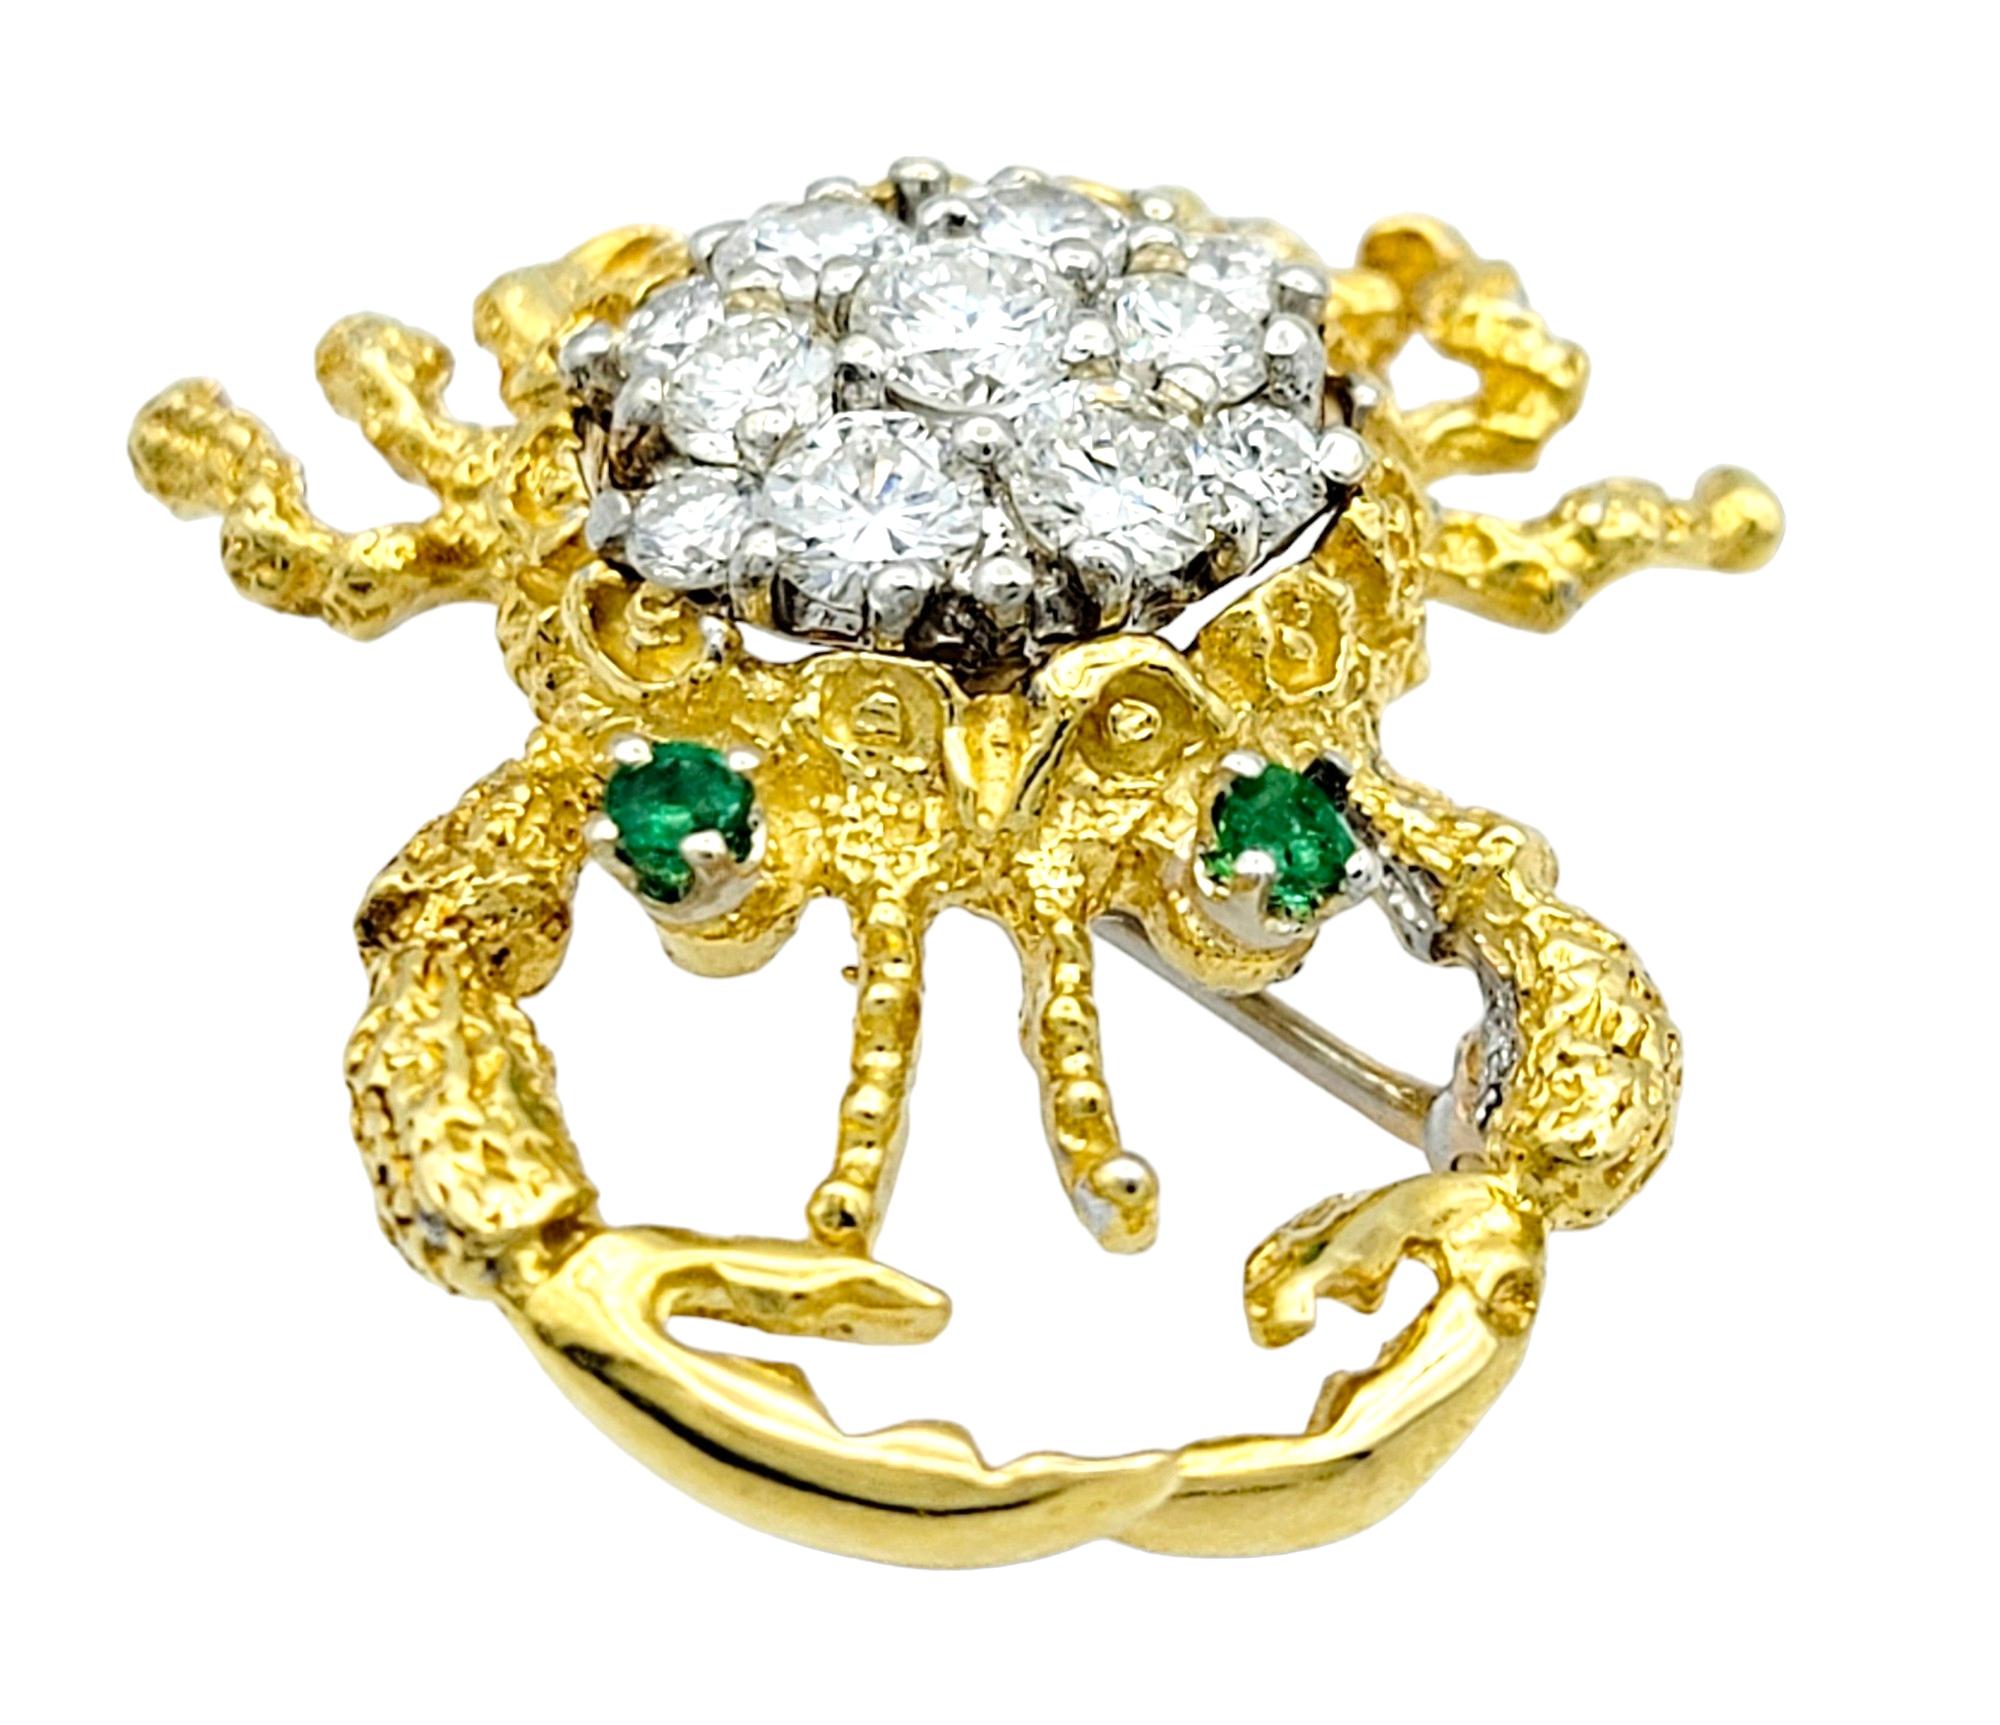 This stunning designer crab brooch, set in radiant 18 karat yellow gold, is a true testament to both artistry and elegance. The body of the crab is adorned with a brilliant cluster of diamonds, creating a captivating spectacle that mimics the